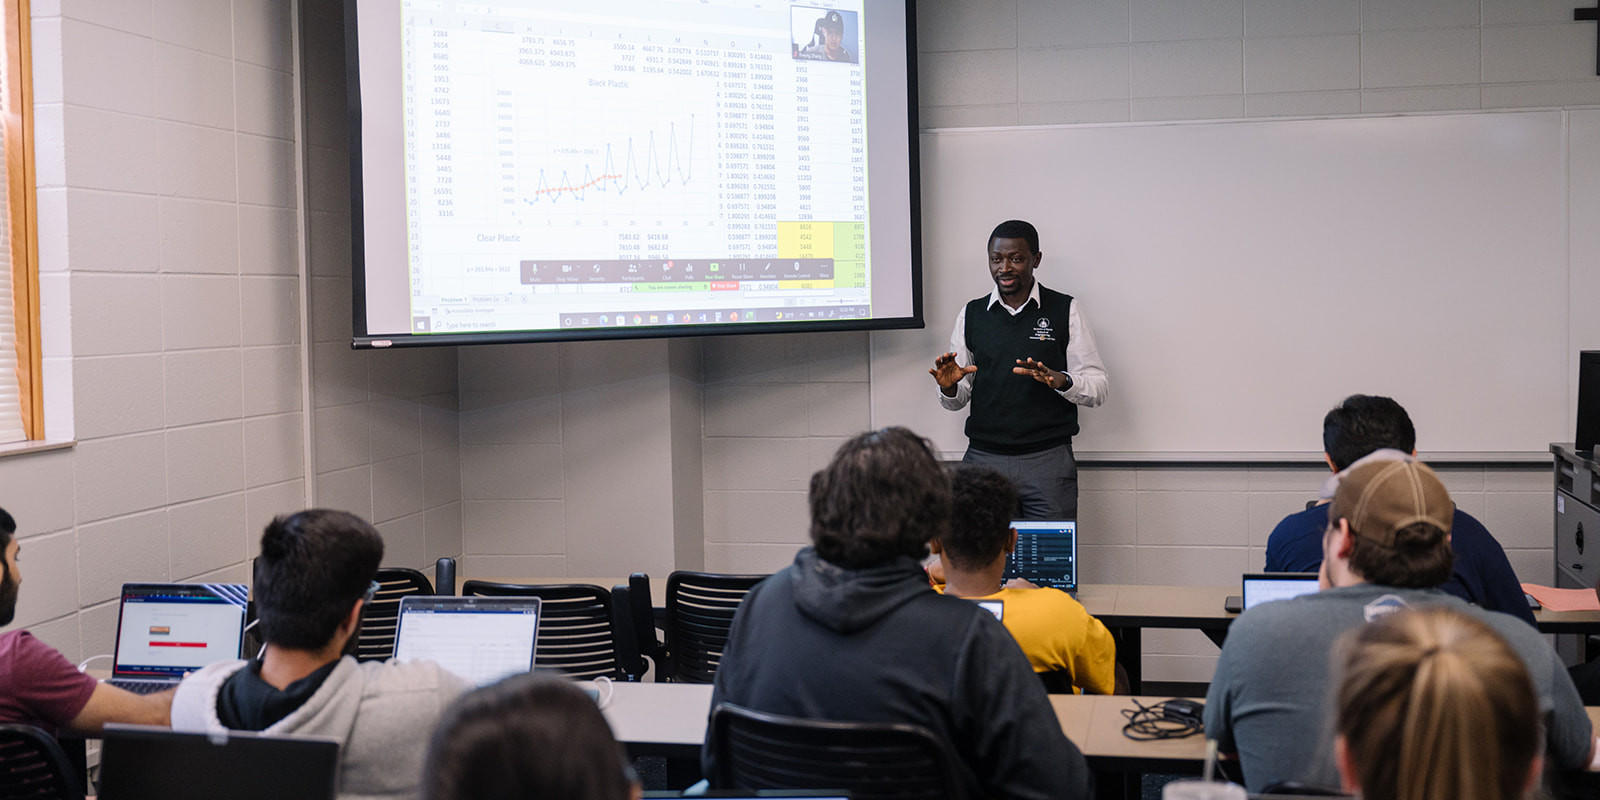 An instructor speaks with arms outstretched to seated students, next to a projection screen showing an Excel document being shared over Zoom.